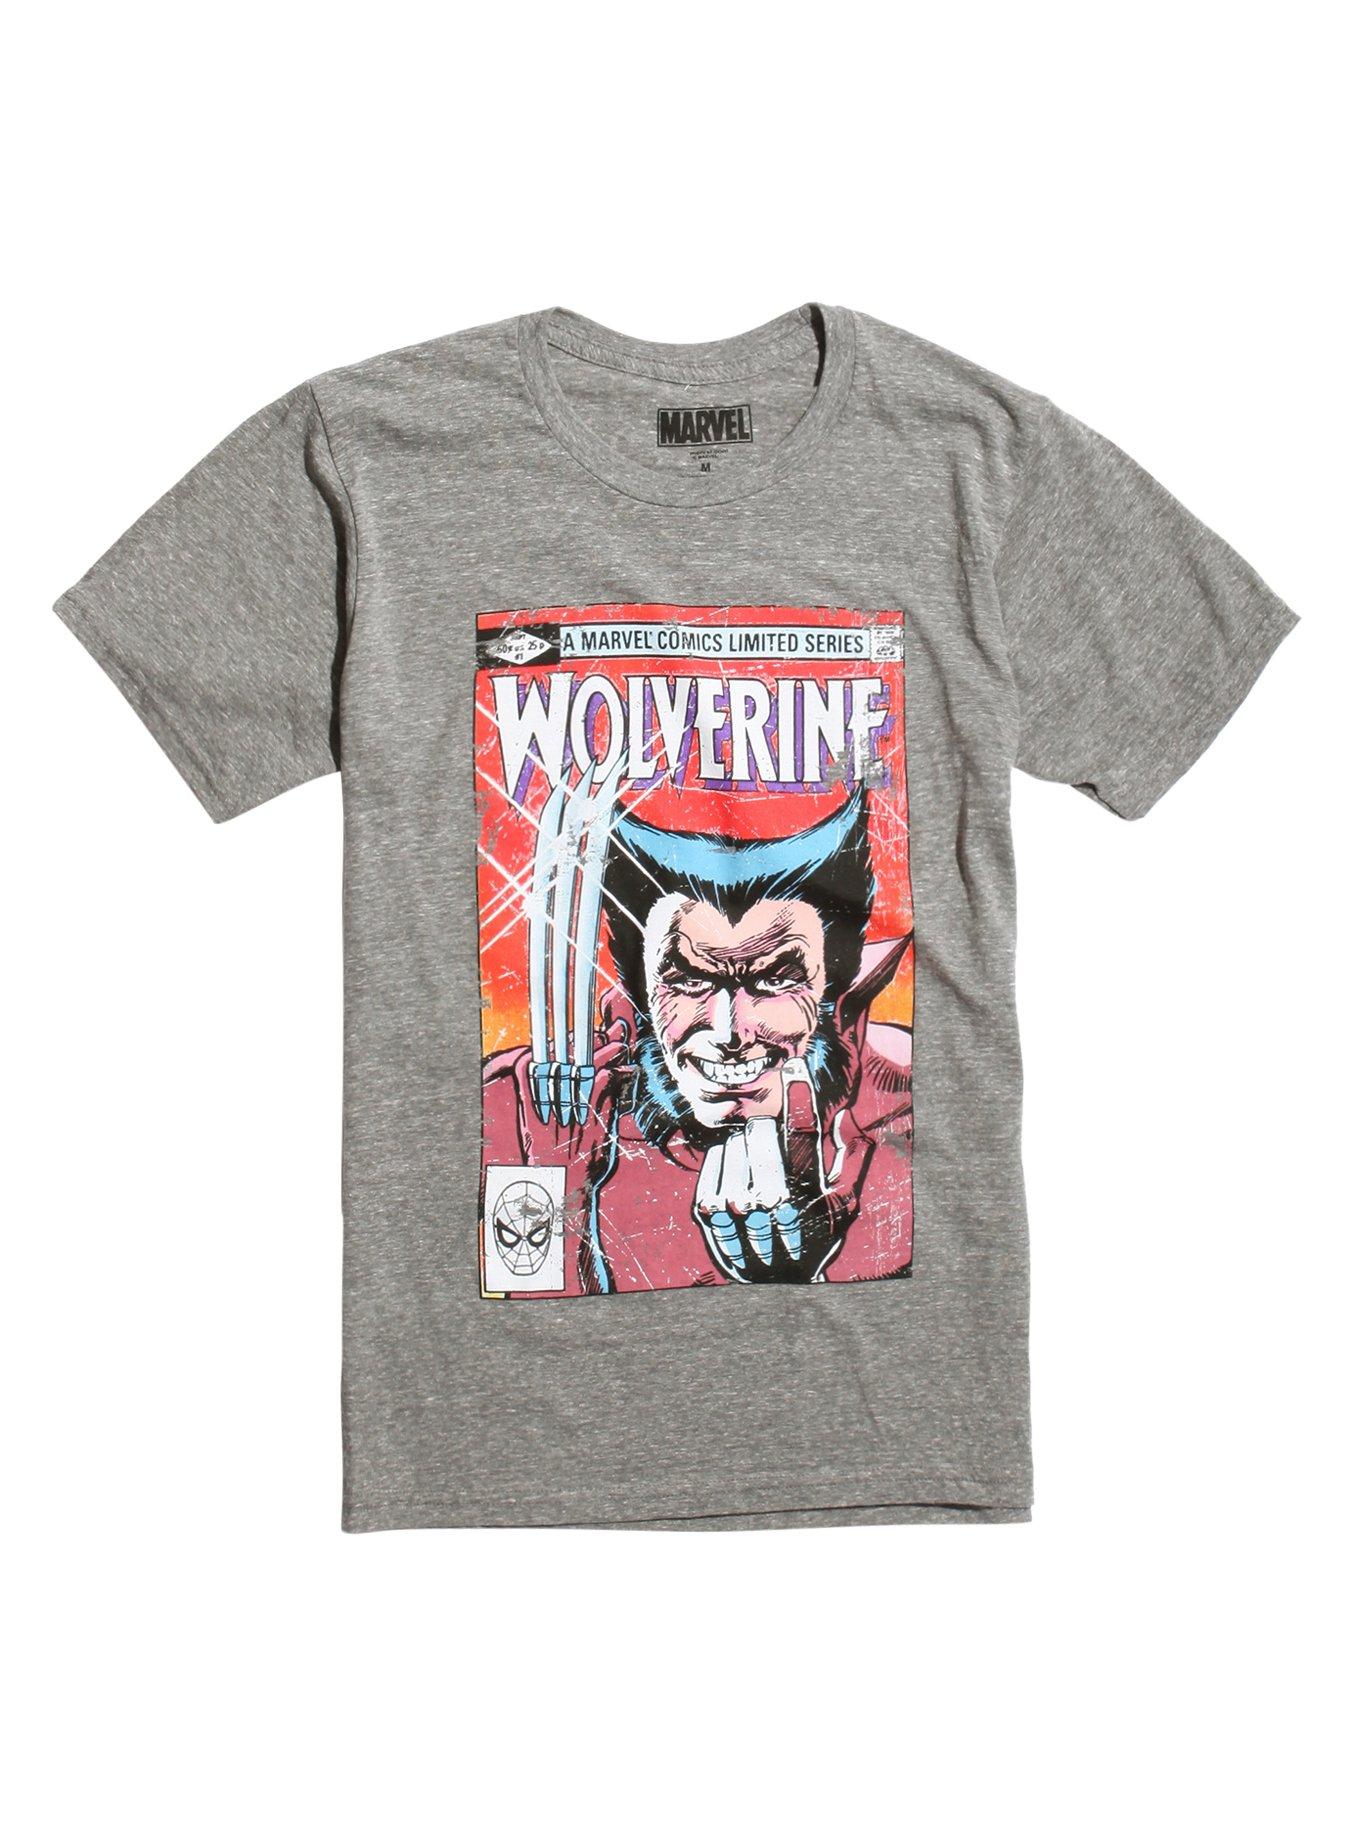 Marvel Wolverine Issue #1 Comic Cover T-Shirt, GREY, hi-res